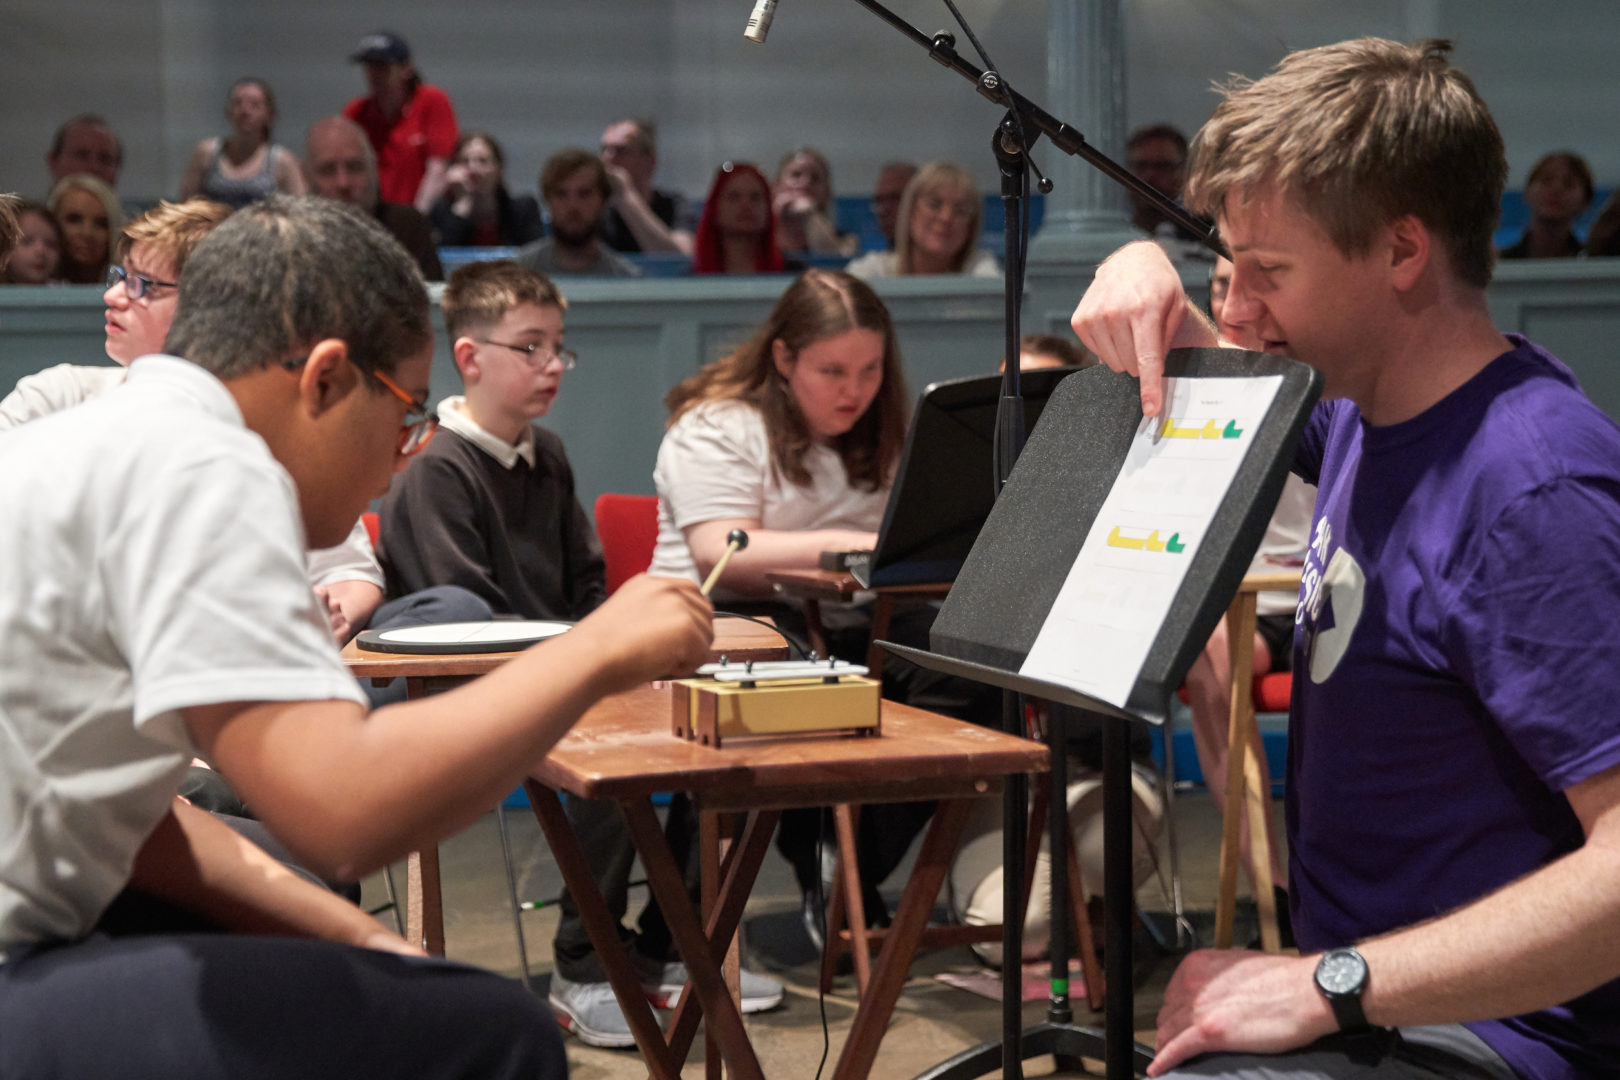 Young person at music concert playing chime bars with Figurenotes stickers. Tutor supporting young person by pointing to Figurenotes score.